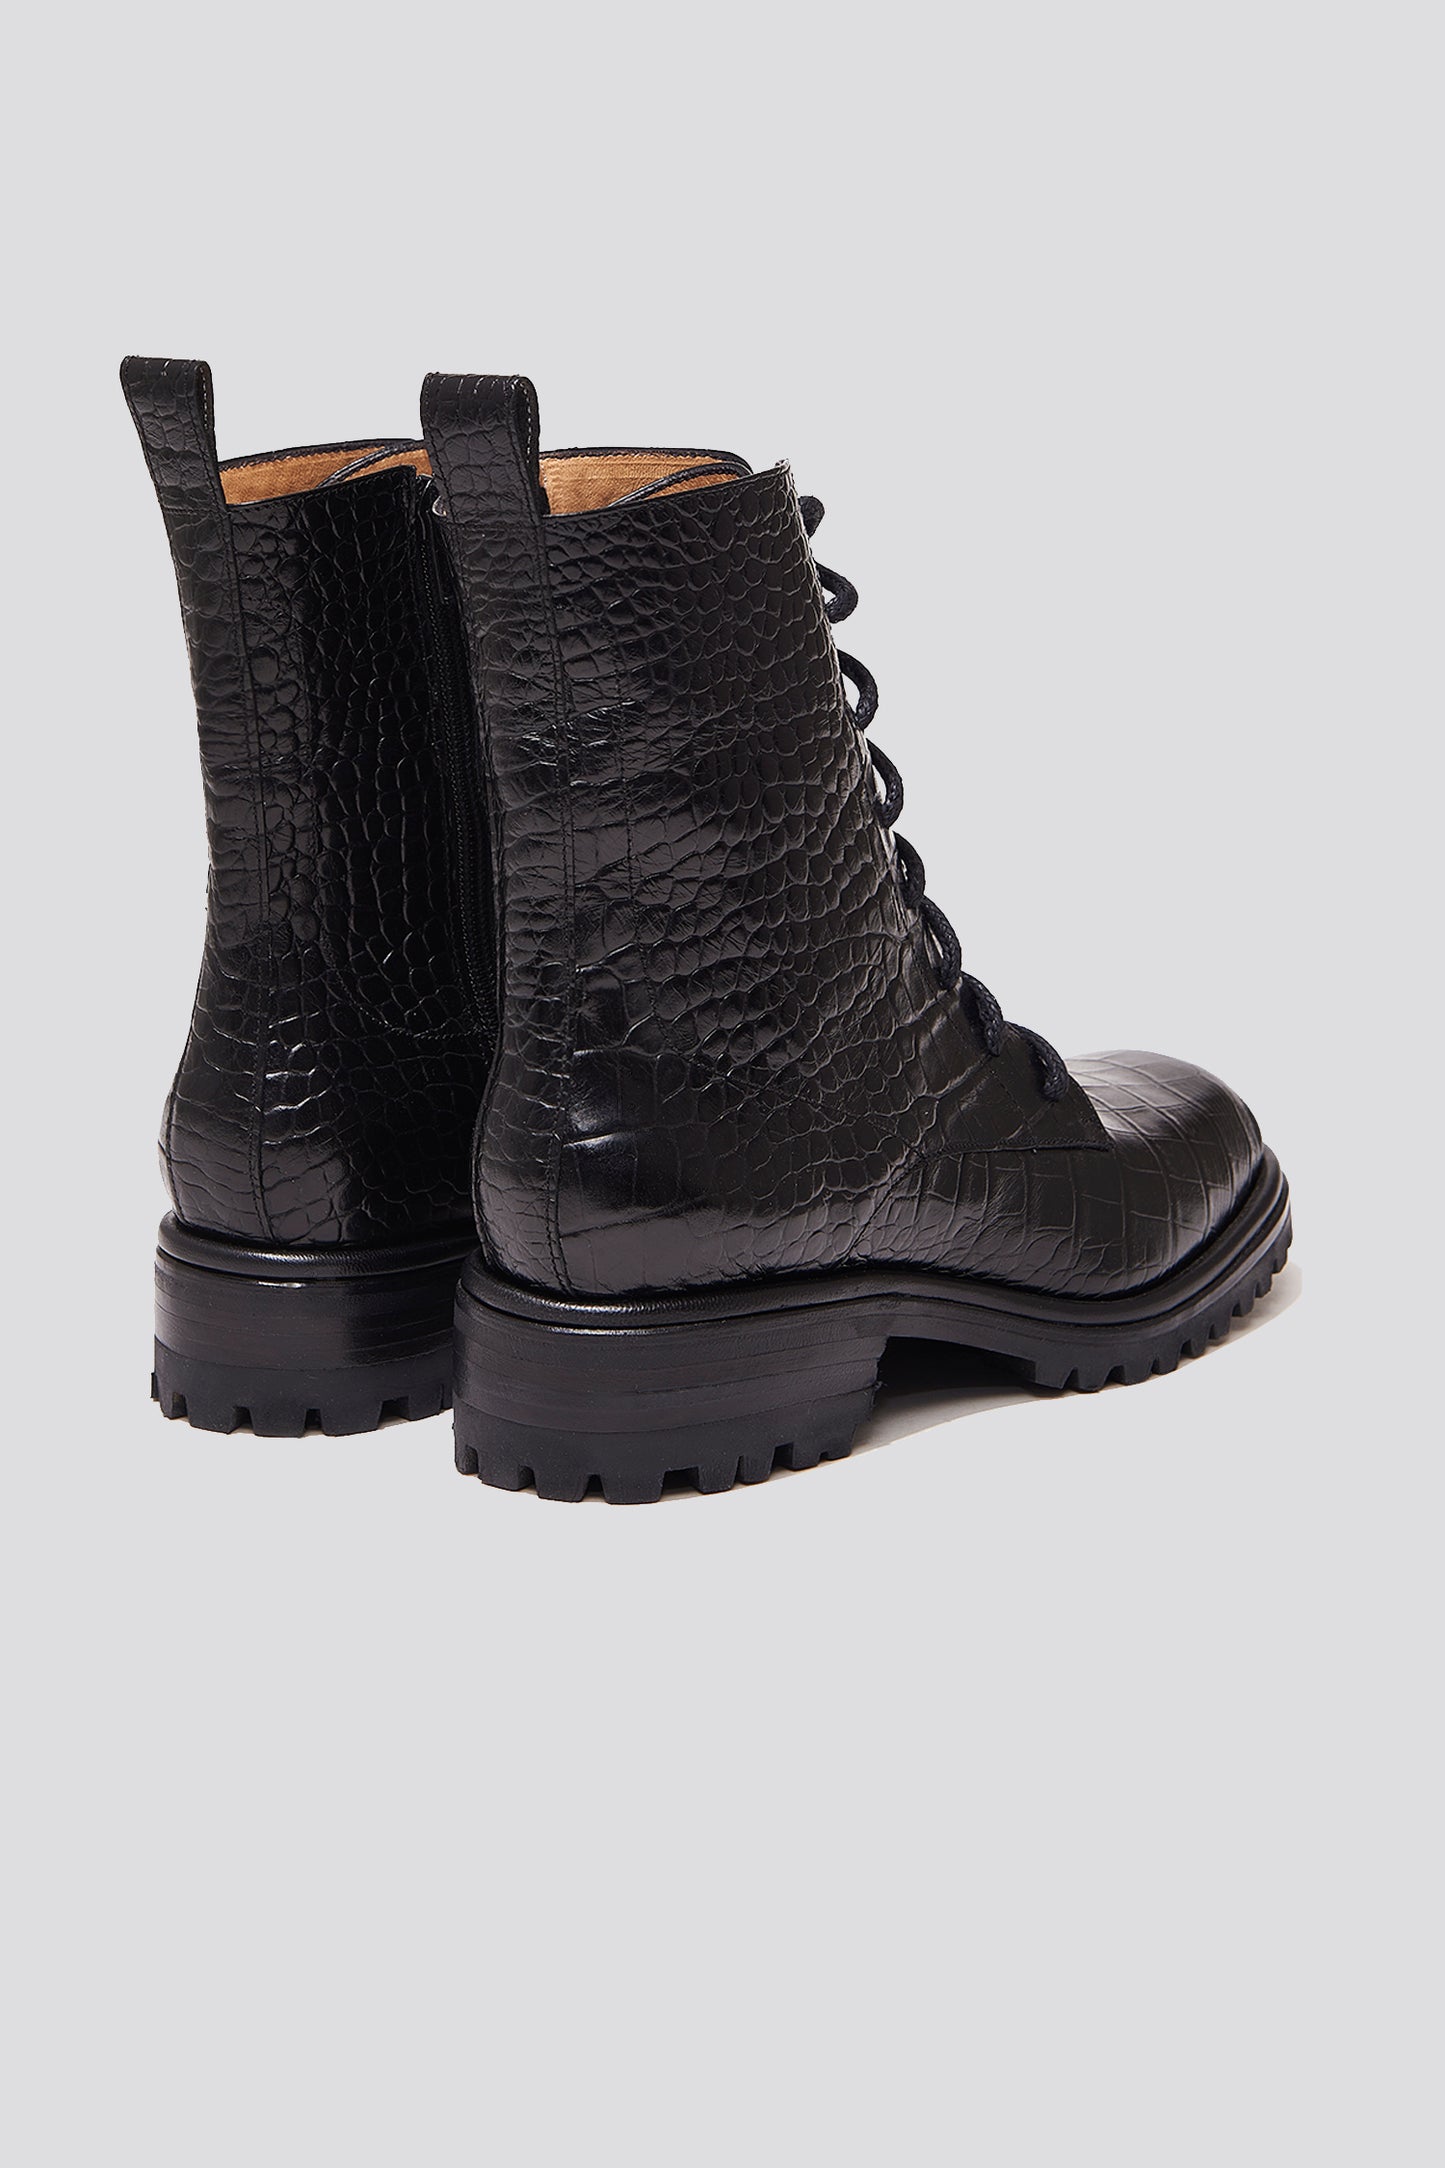 Low Roma Lace Up Boot in Black Croco